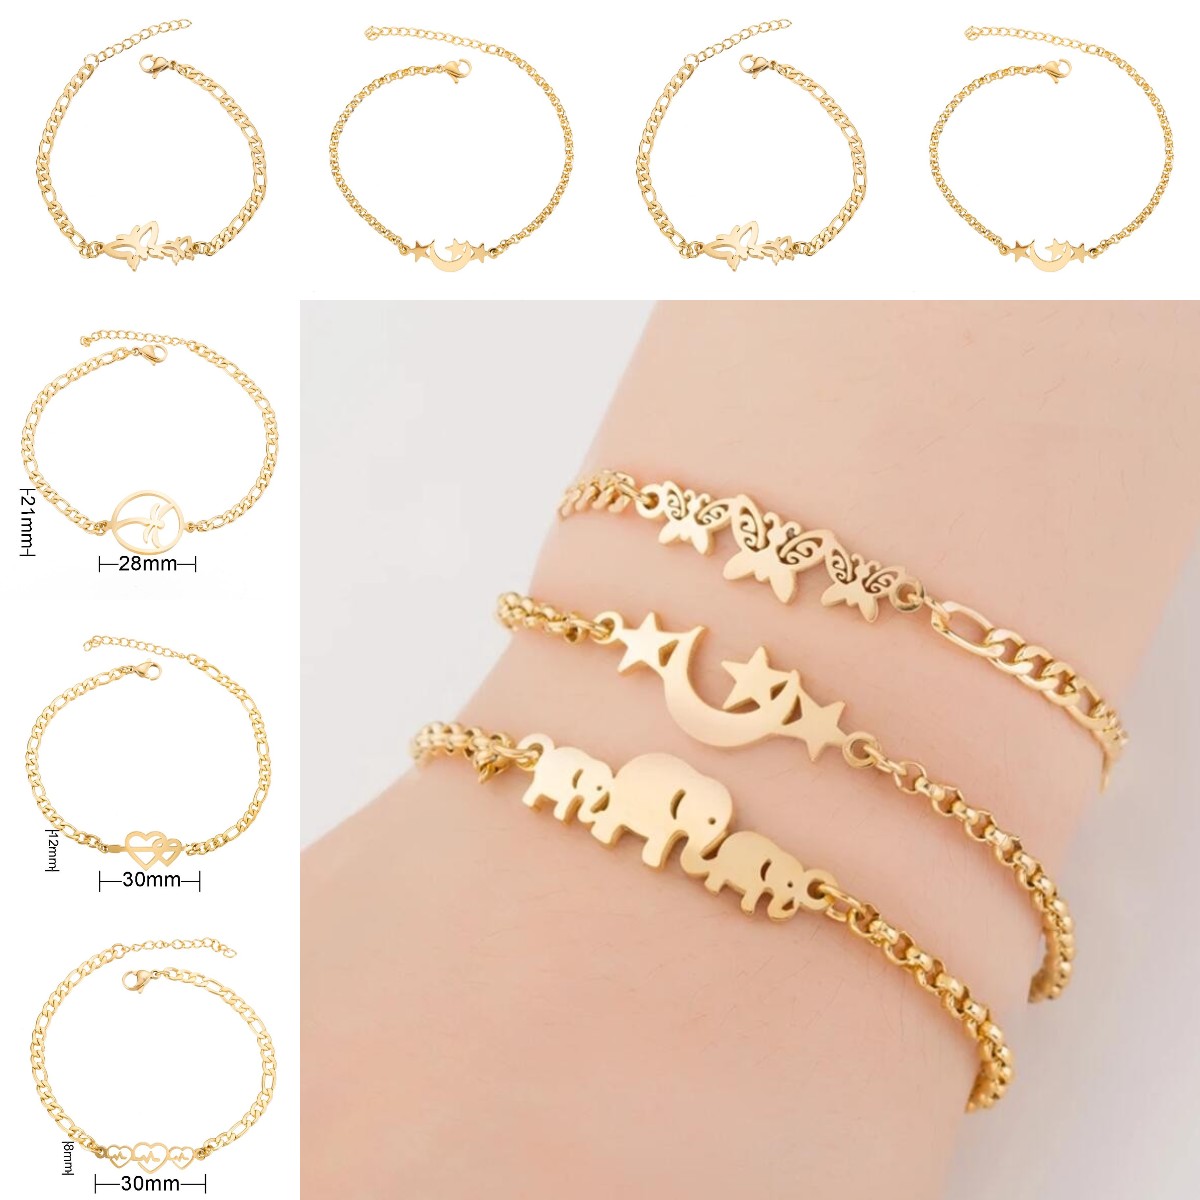 Bohemia Stainless Steel Butterfly Charm Bracelet For Women Fashion Girls Gold Color Elephant star moon Wrist Jewelry Party Wedding Gift